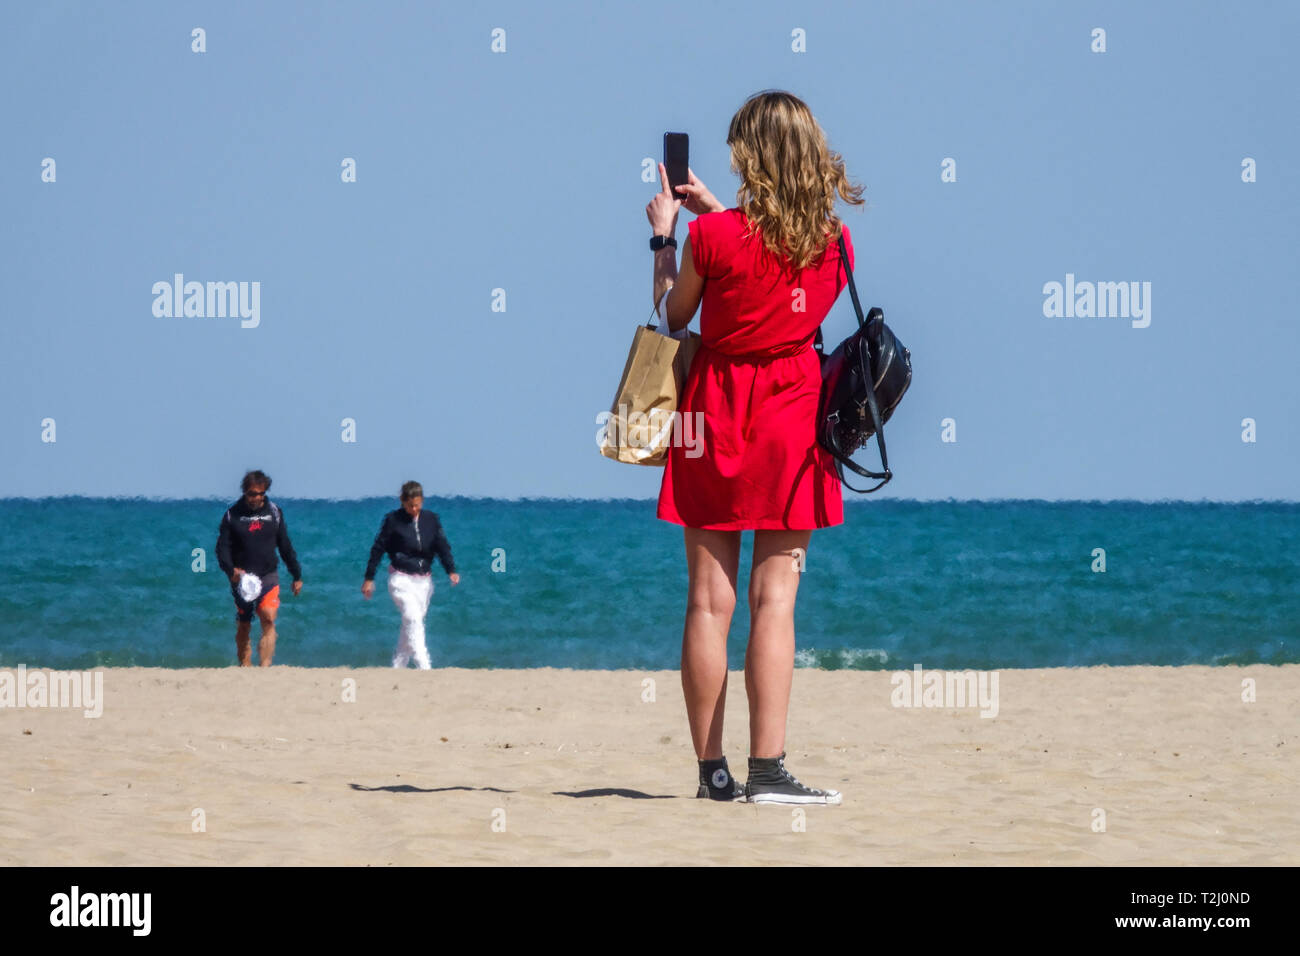 Valencia beach Malvarrosa, a young woman in red suit make a photo on mobile, rear view Spain Sea view Valencia beach tourists Stock Photo